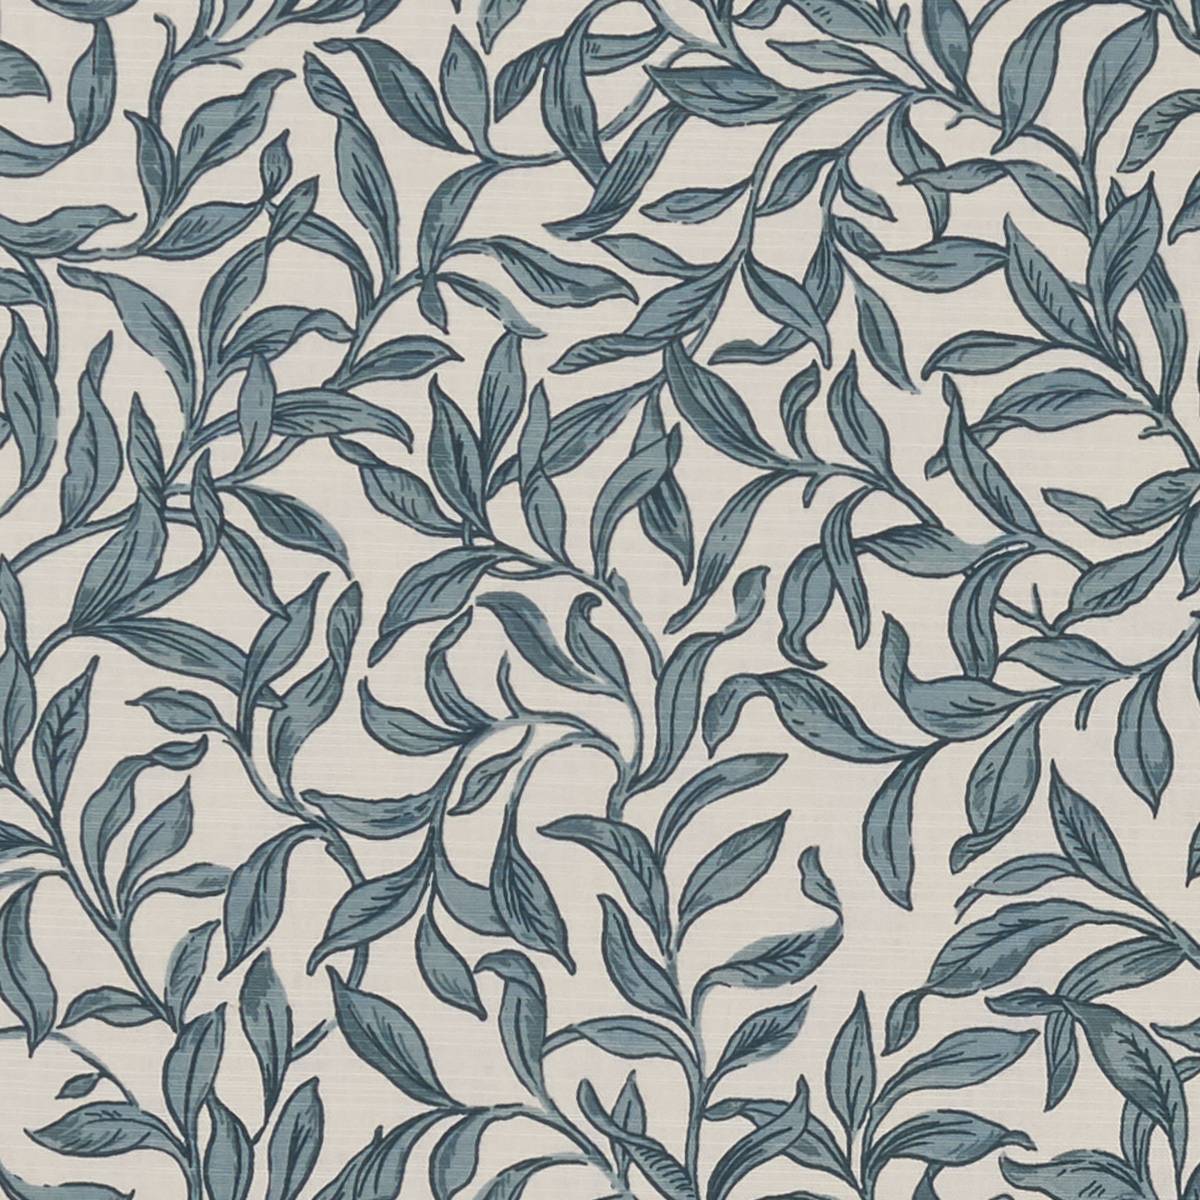 Entwistle Teal Fabric by Studio G